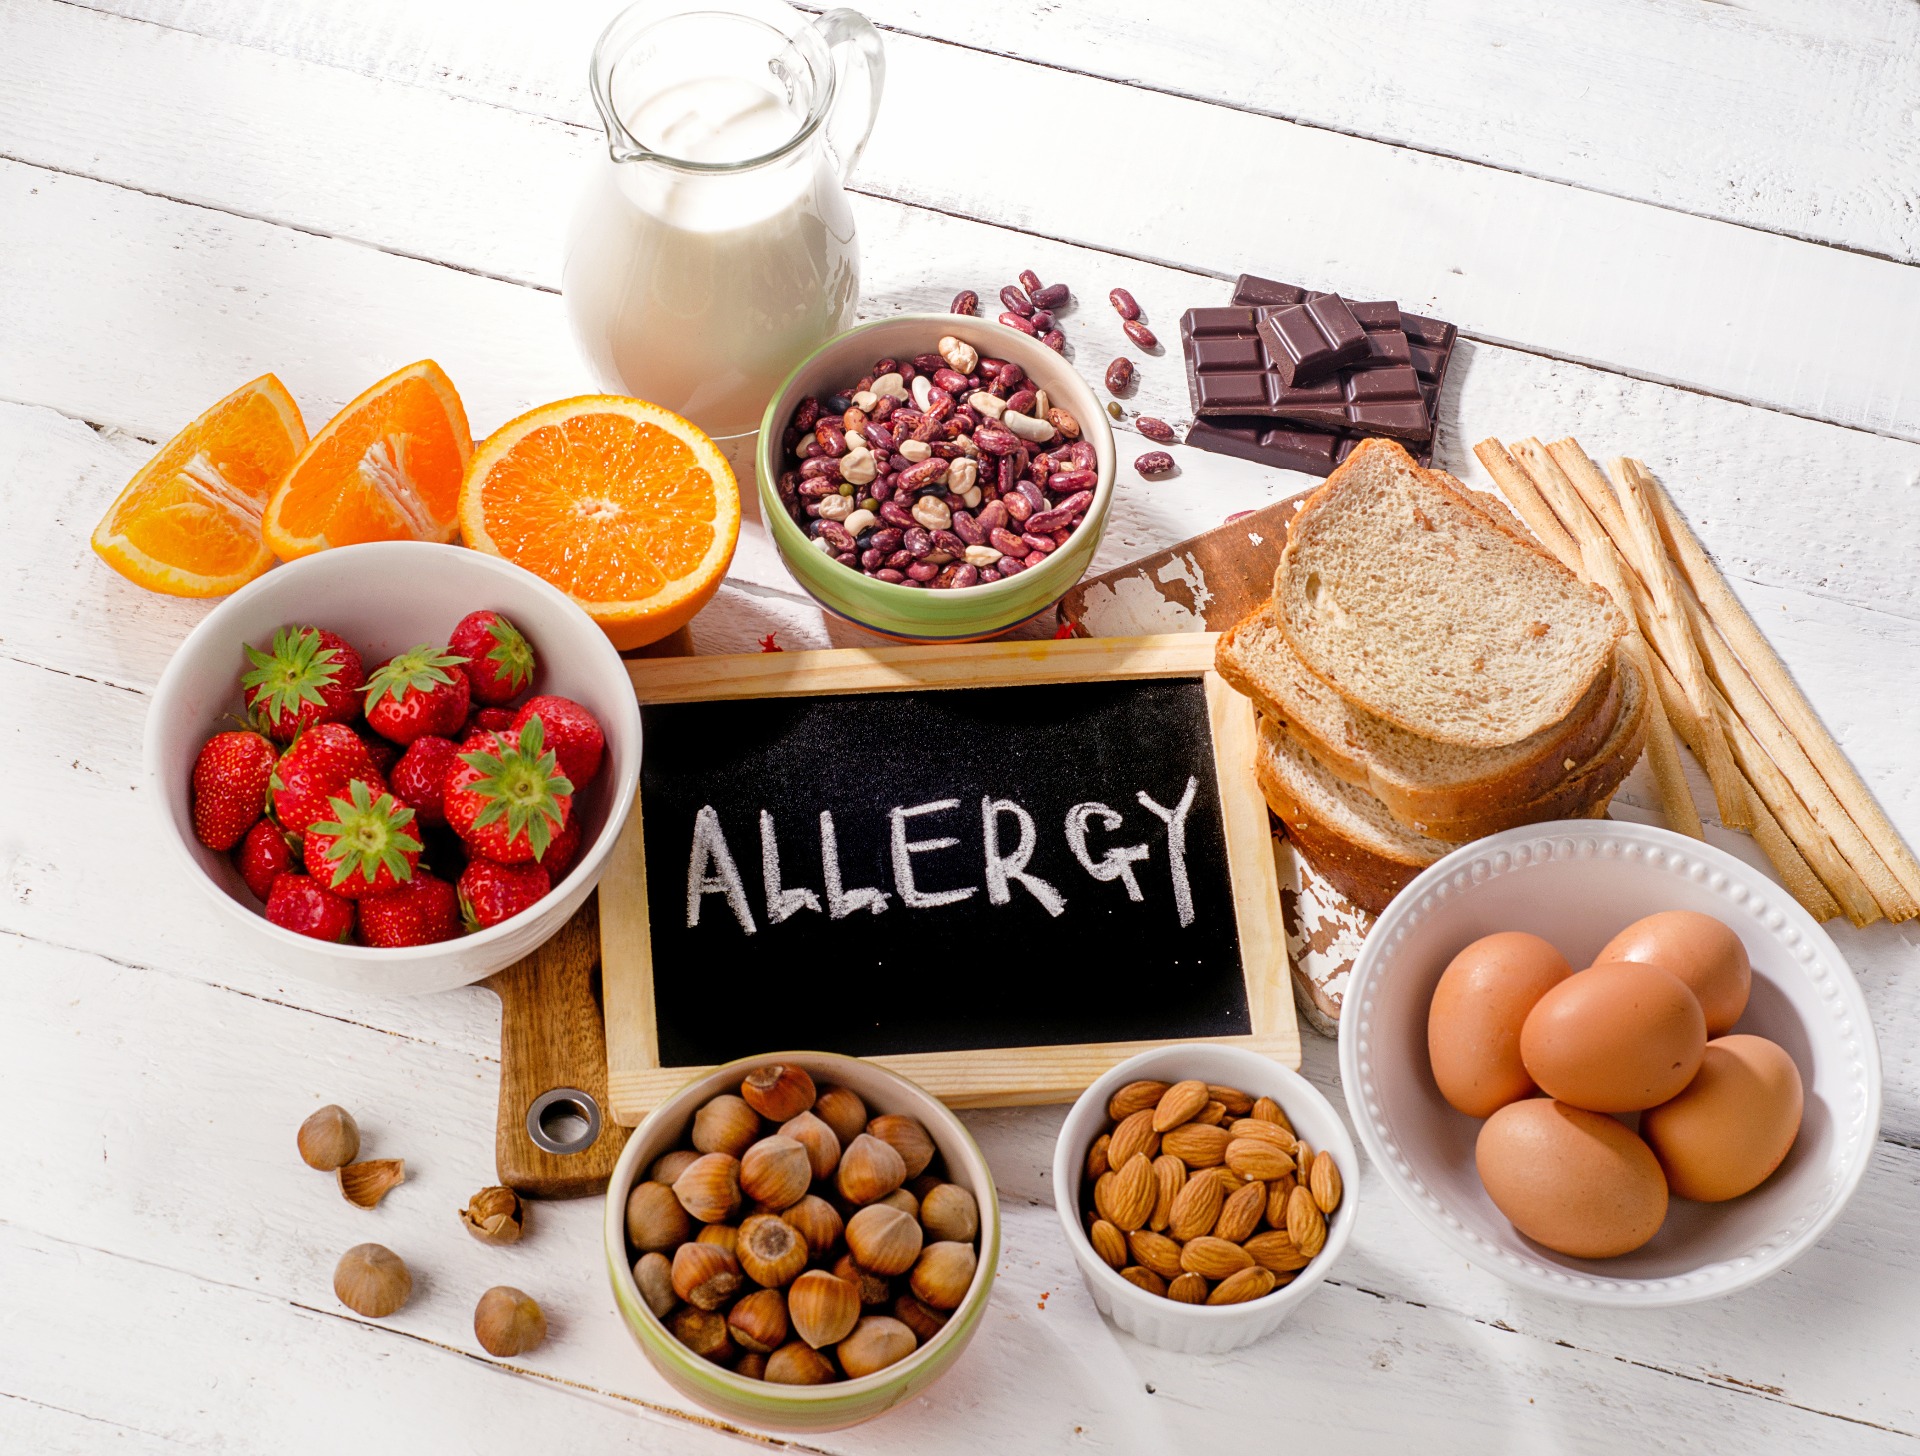 "Allergy" written on a chalkboard, surrounded by food, including bread, eggs, strawberries, nuts, and chocolate; our No Win No Fee Solicitors specialise in allergy compensation claims